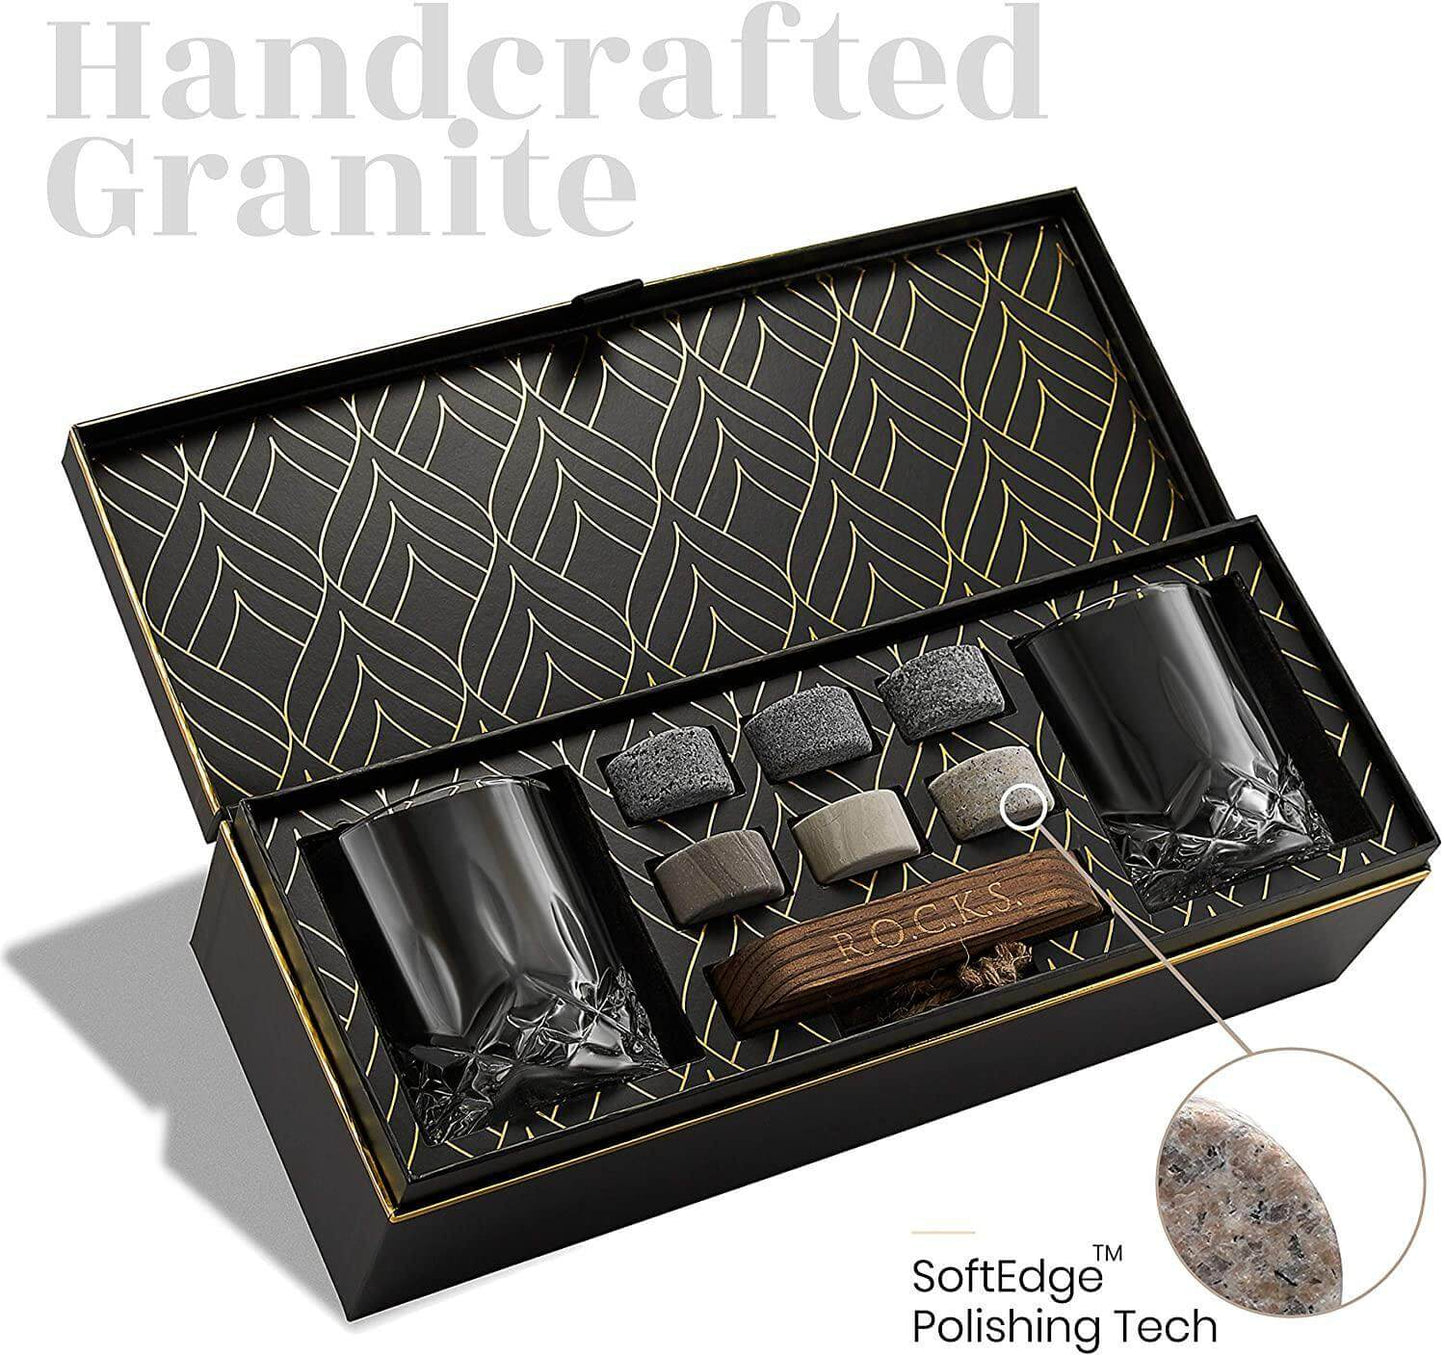 The Connoisseur's Set - Whiskey Stones & Signature Glass Edition